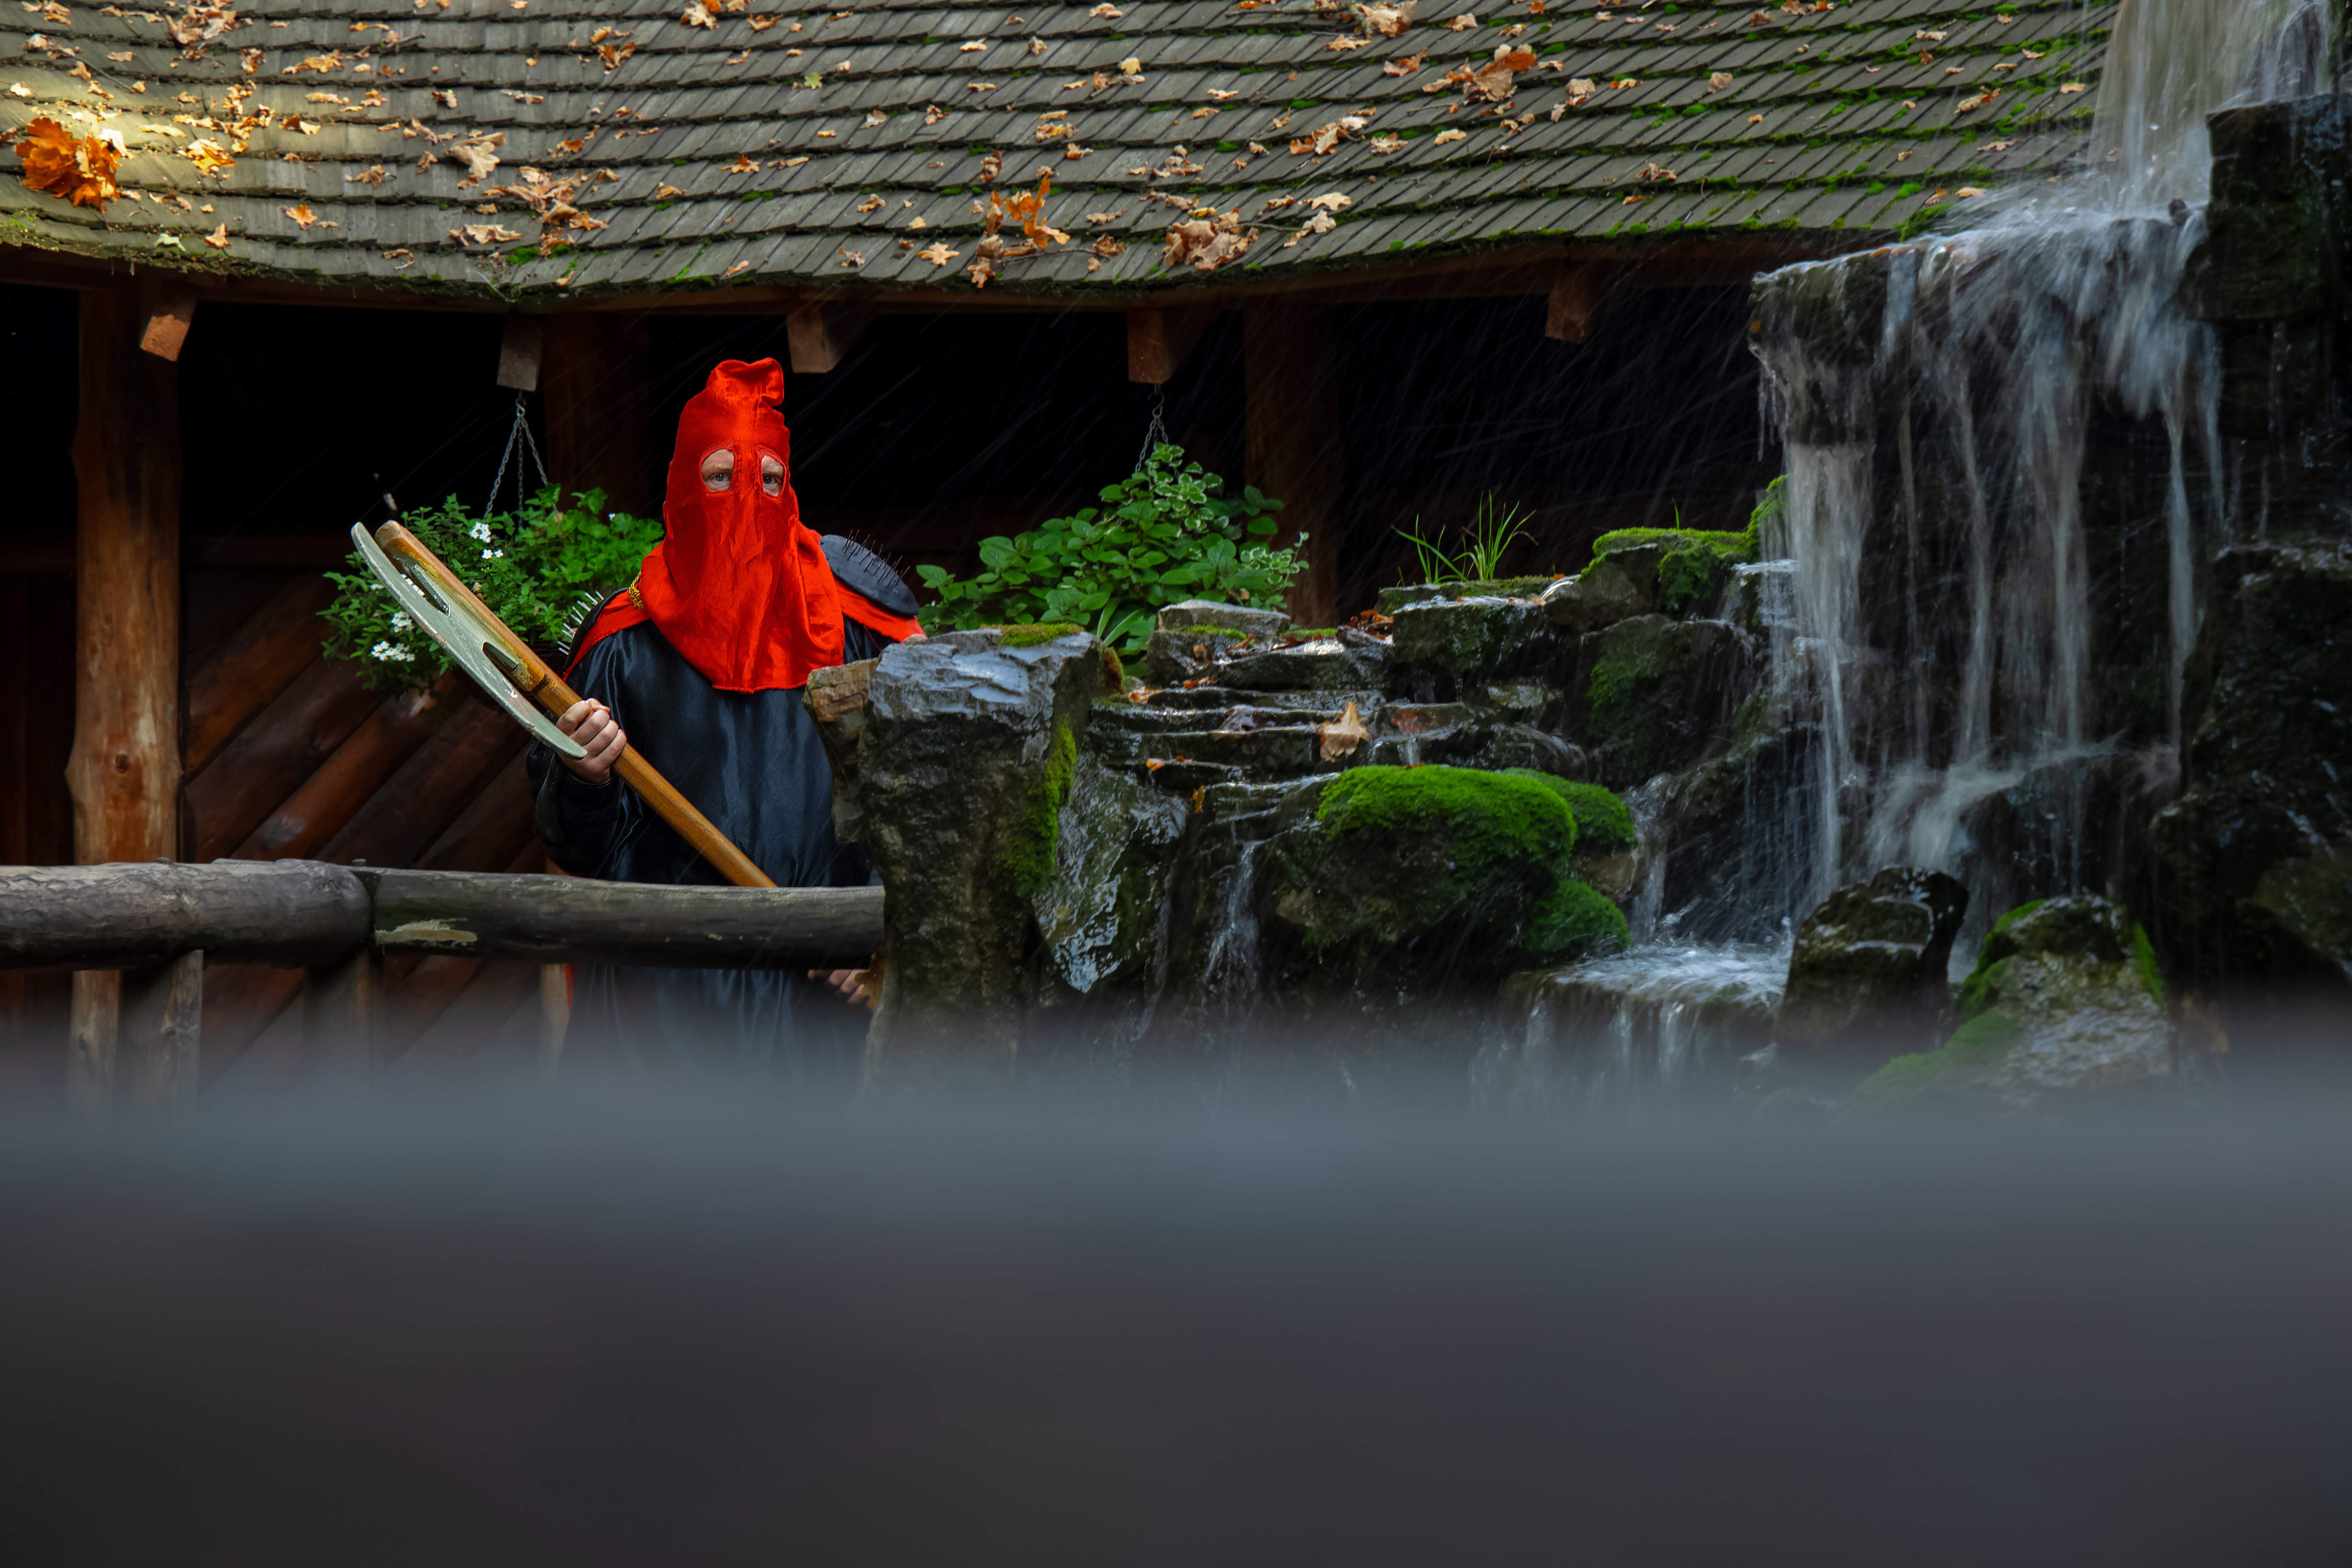 Executioner role play cosplay by adult person in costume and ax, foreground noise from fountain drops